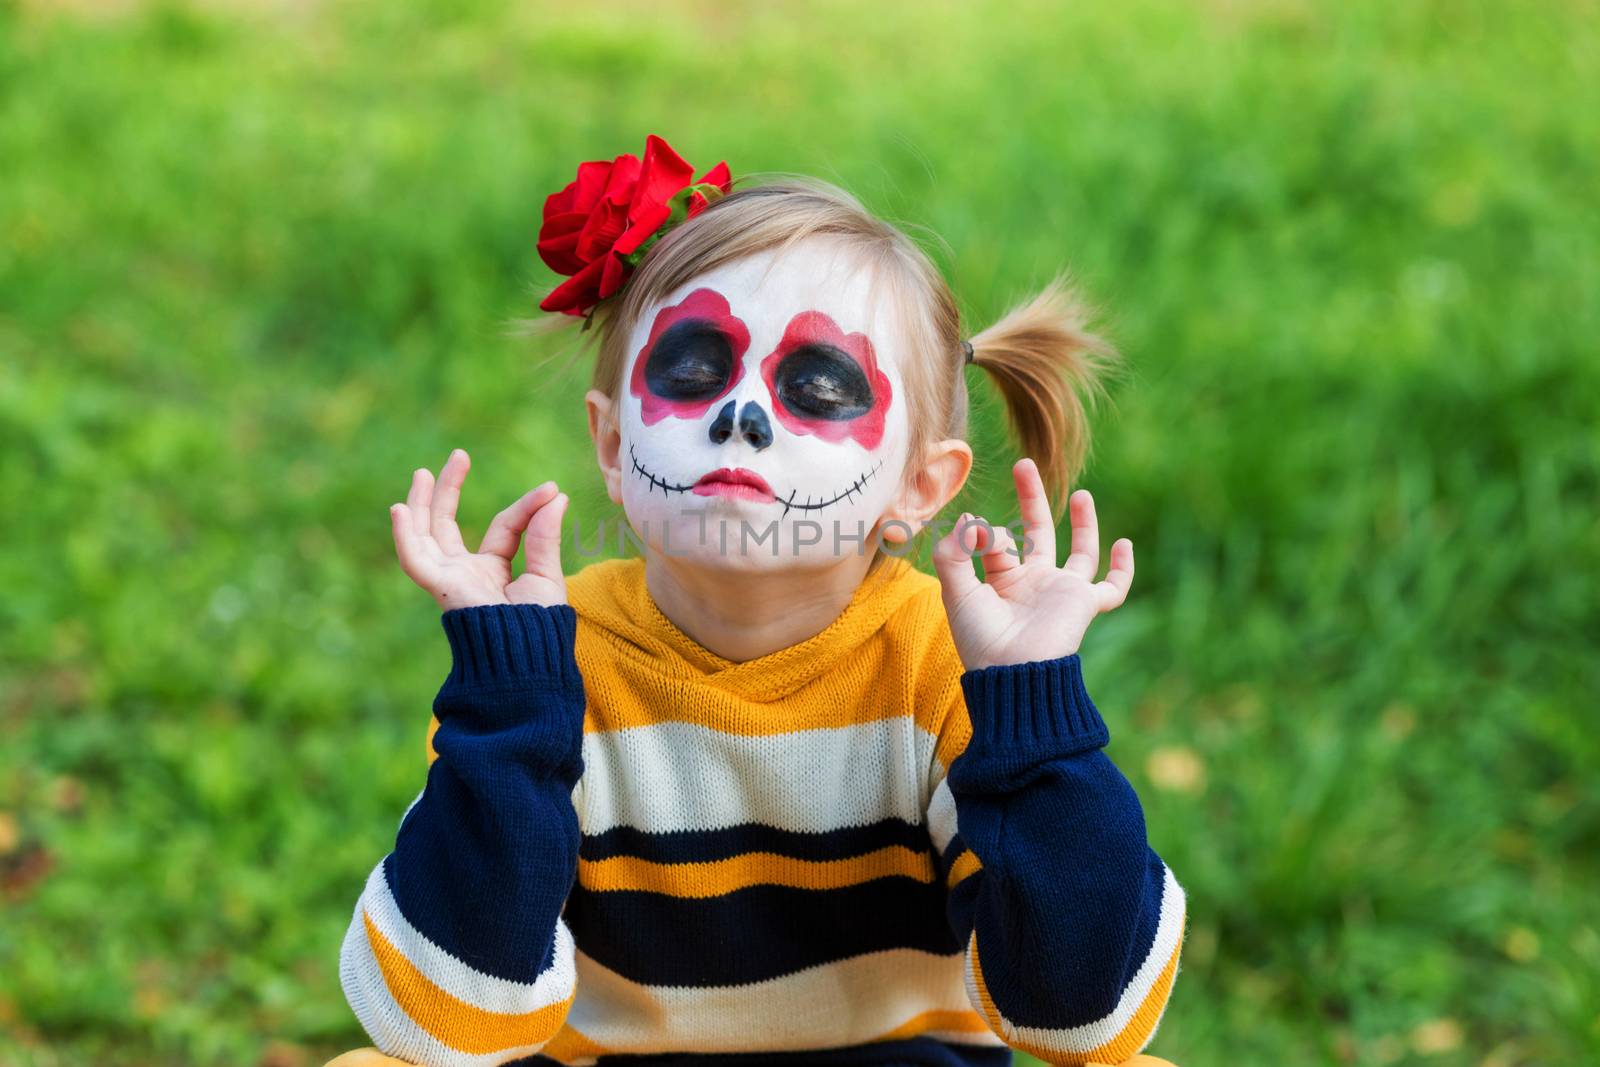 .A little preschool girl with Painted Face, smiling at the camera on the playground, celebrates Halloween or Mexican Day of the Dead.